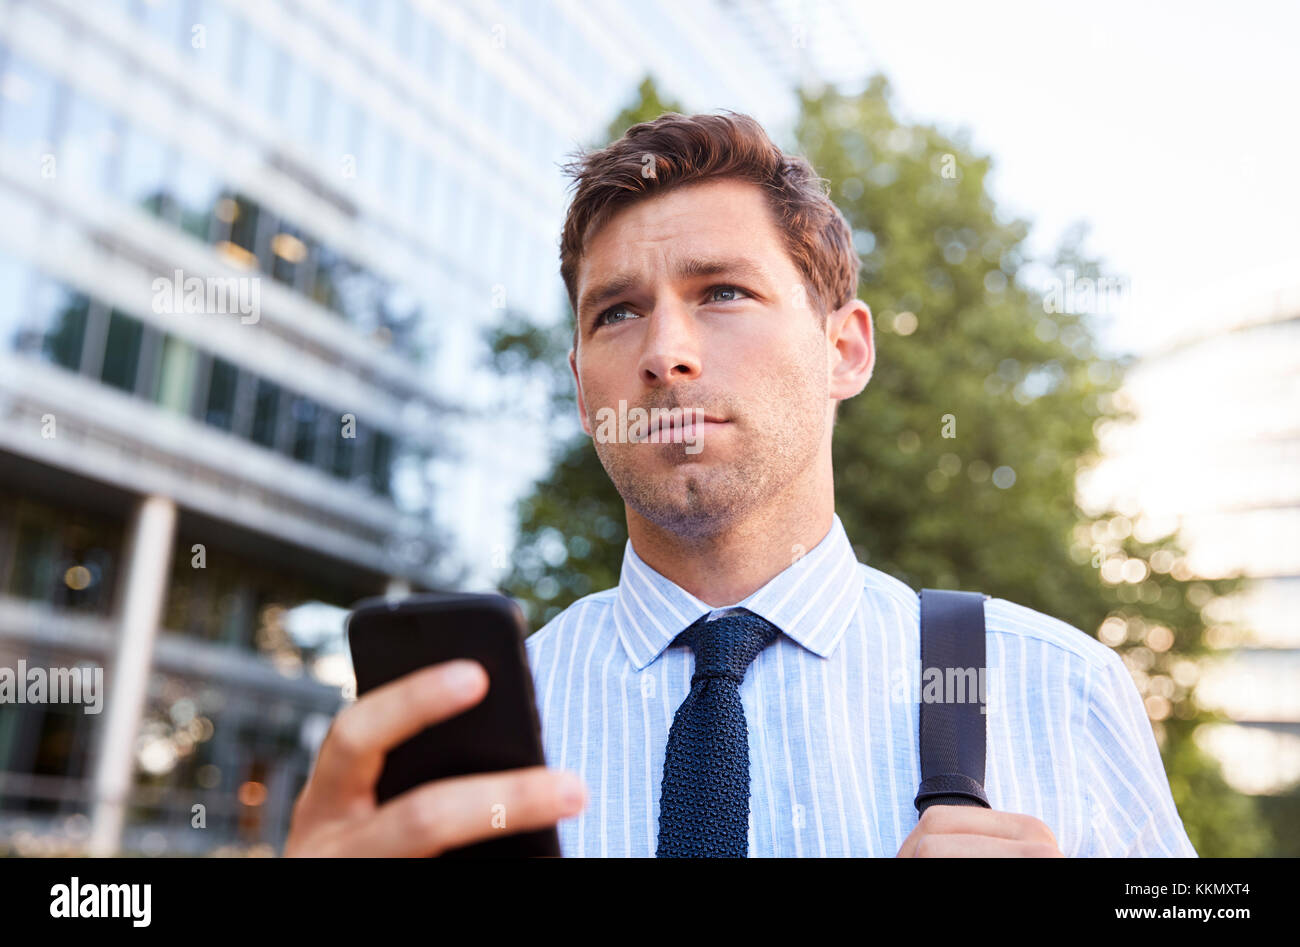 Businessman Walking To Work In City Looking At Mobile Phone Stock Photo